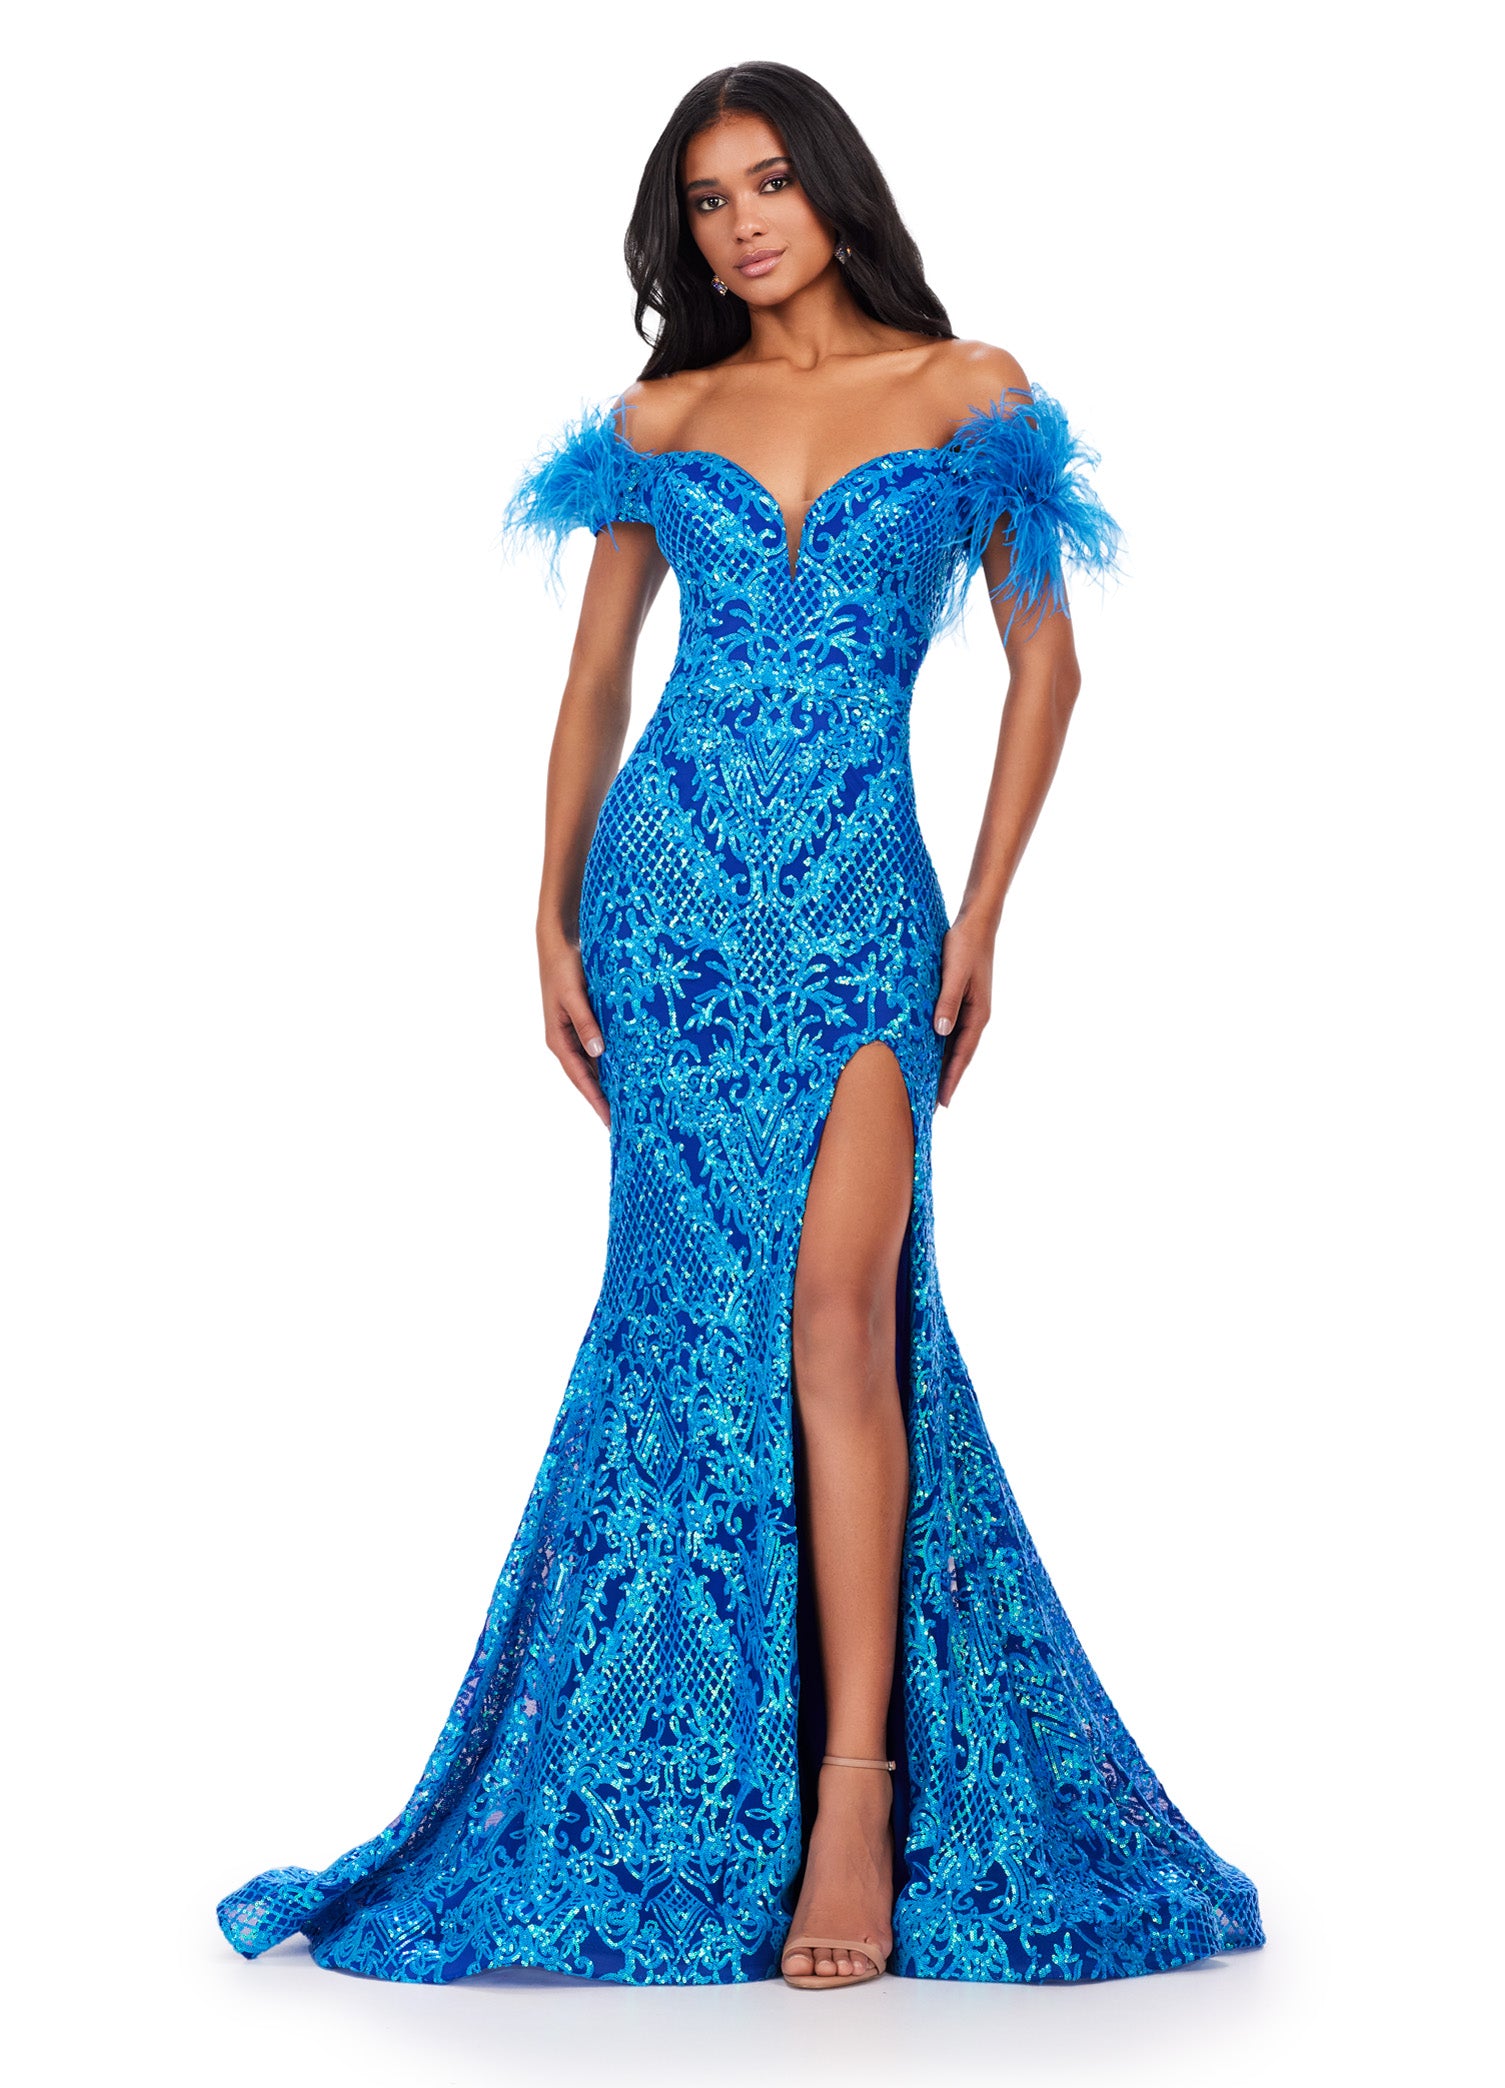 Ashley Lauren 11463 Long Prom Sequin Mermaid Prom Dress Feather off the  shoulder Slit Gown